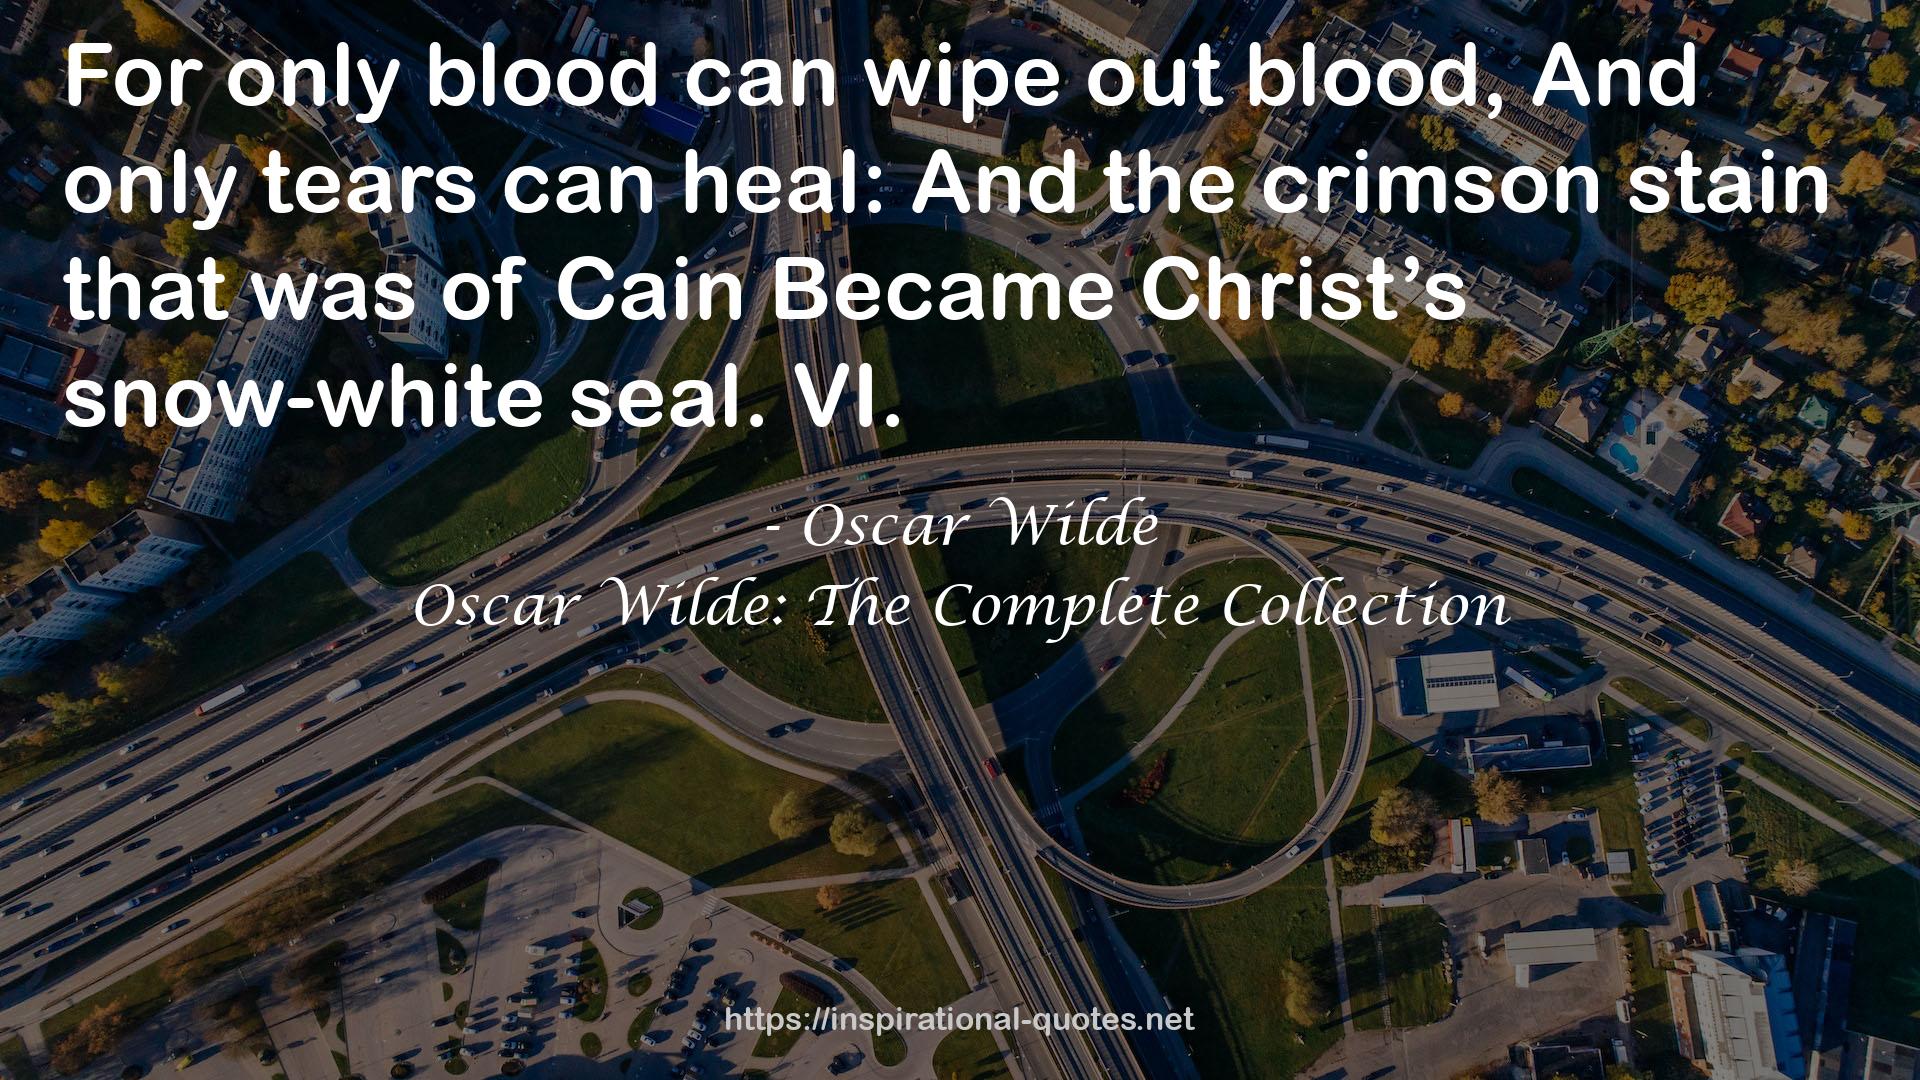 Oscar Wilde: The Complete Collection QUOTES